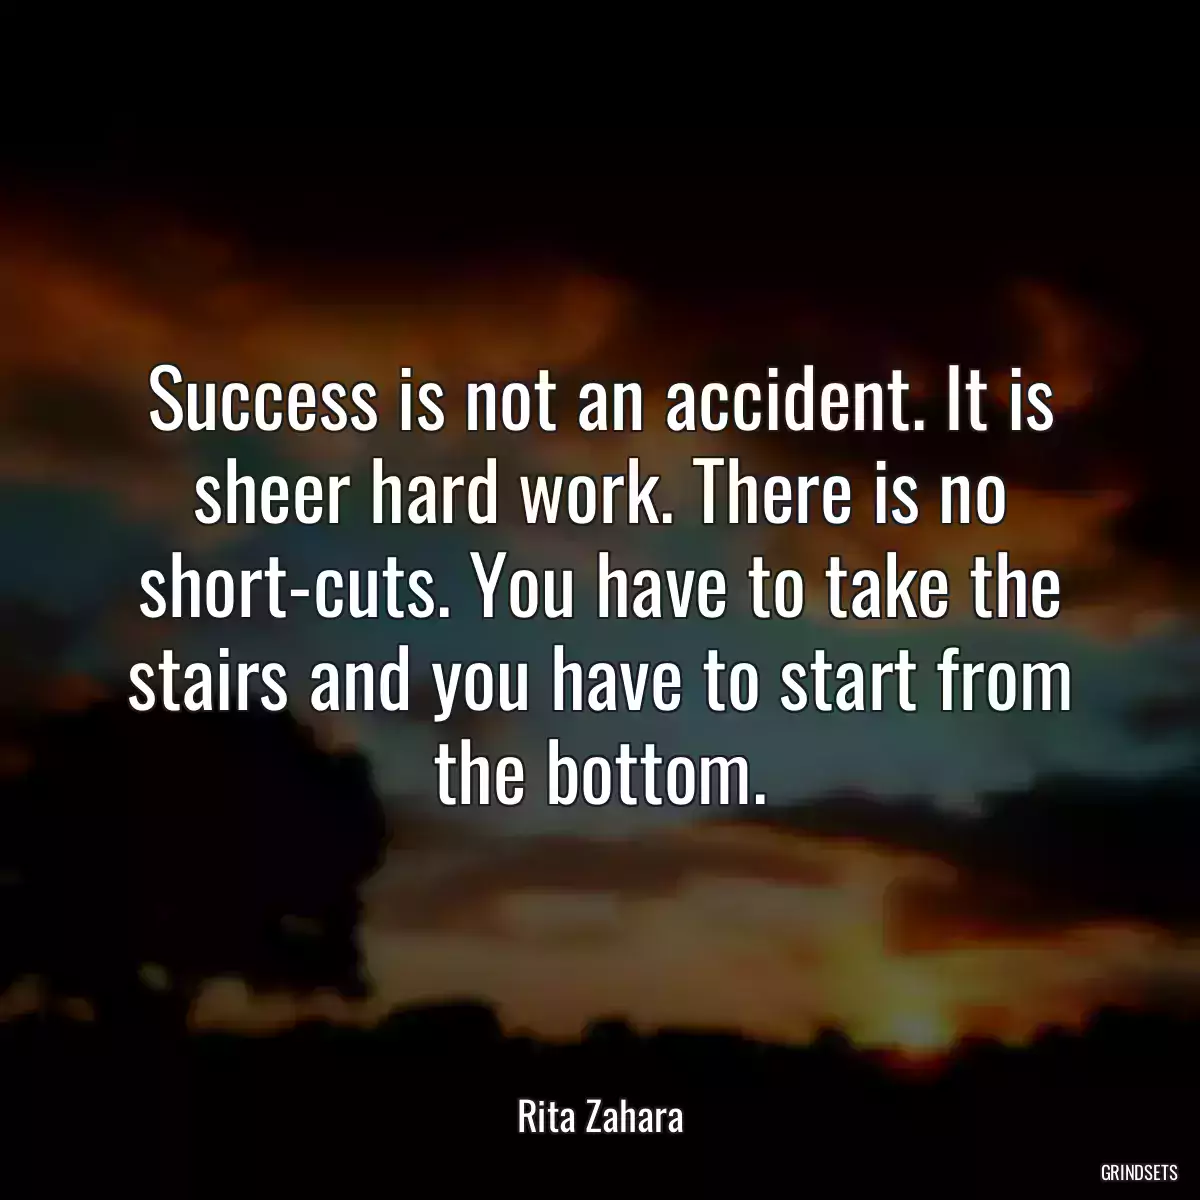 Success is not an accident. It is sheer hard work. There is no short-cuts. You have to take the stairs and you have to start from the bottom.